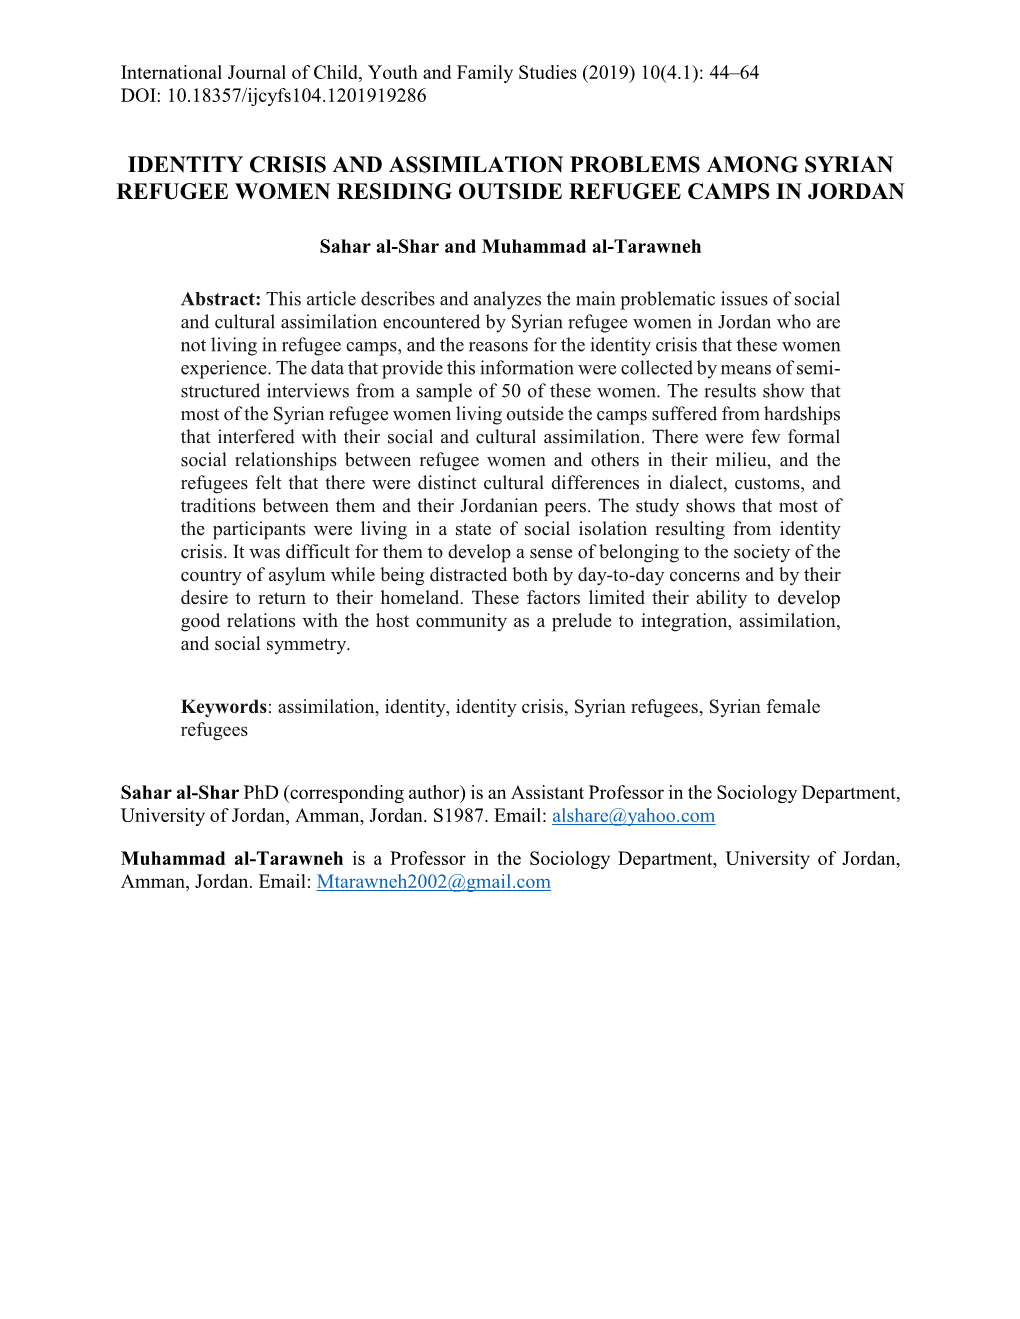 Identity Crisis and Assimilation Problems Among Syrian Refugee Women Residing Outside Refugee Camps in Jordan